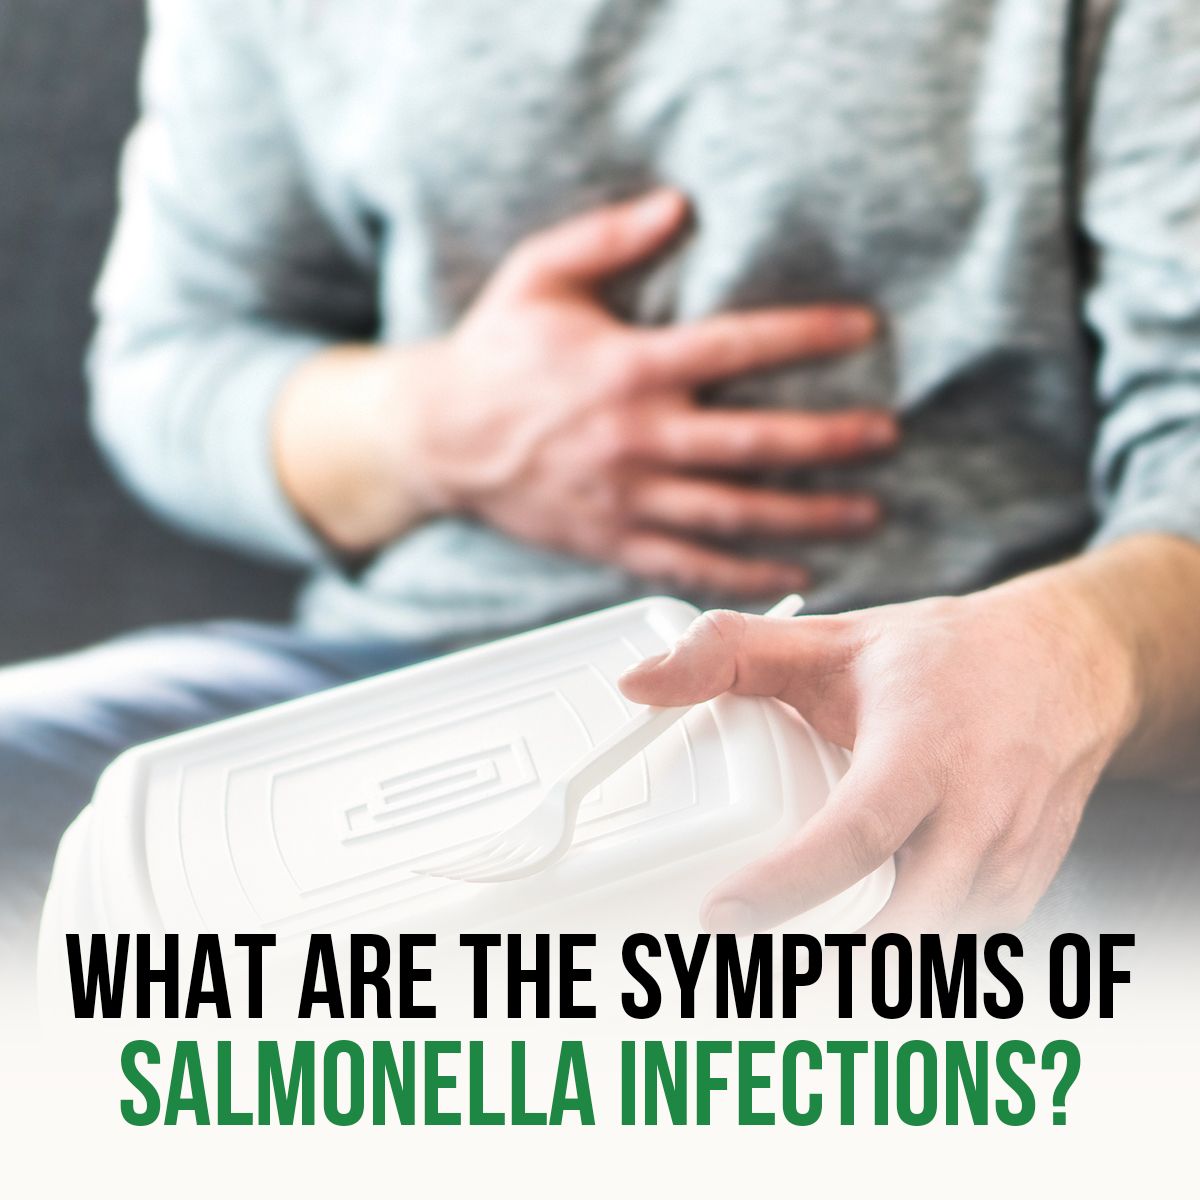 What Are the Symptoms of Salmonella Infections?